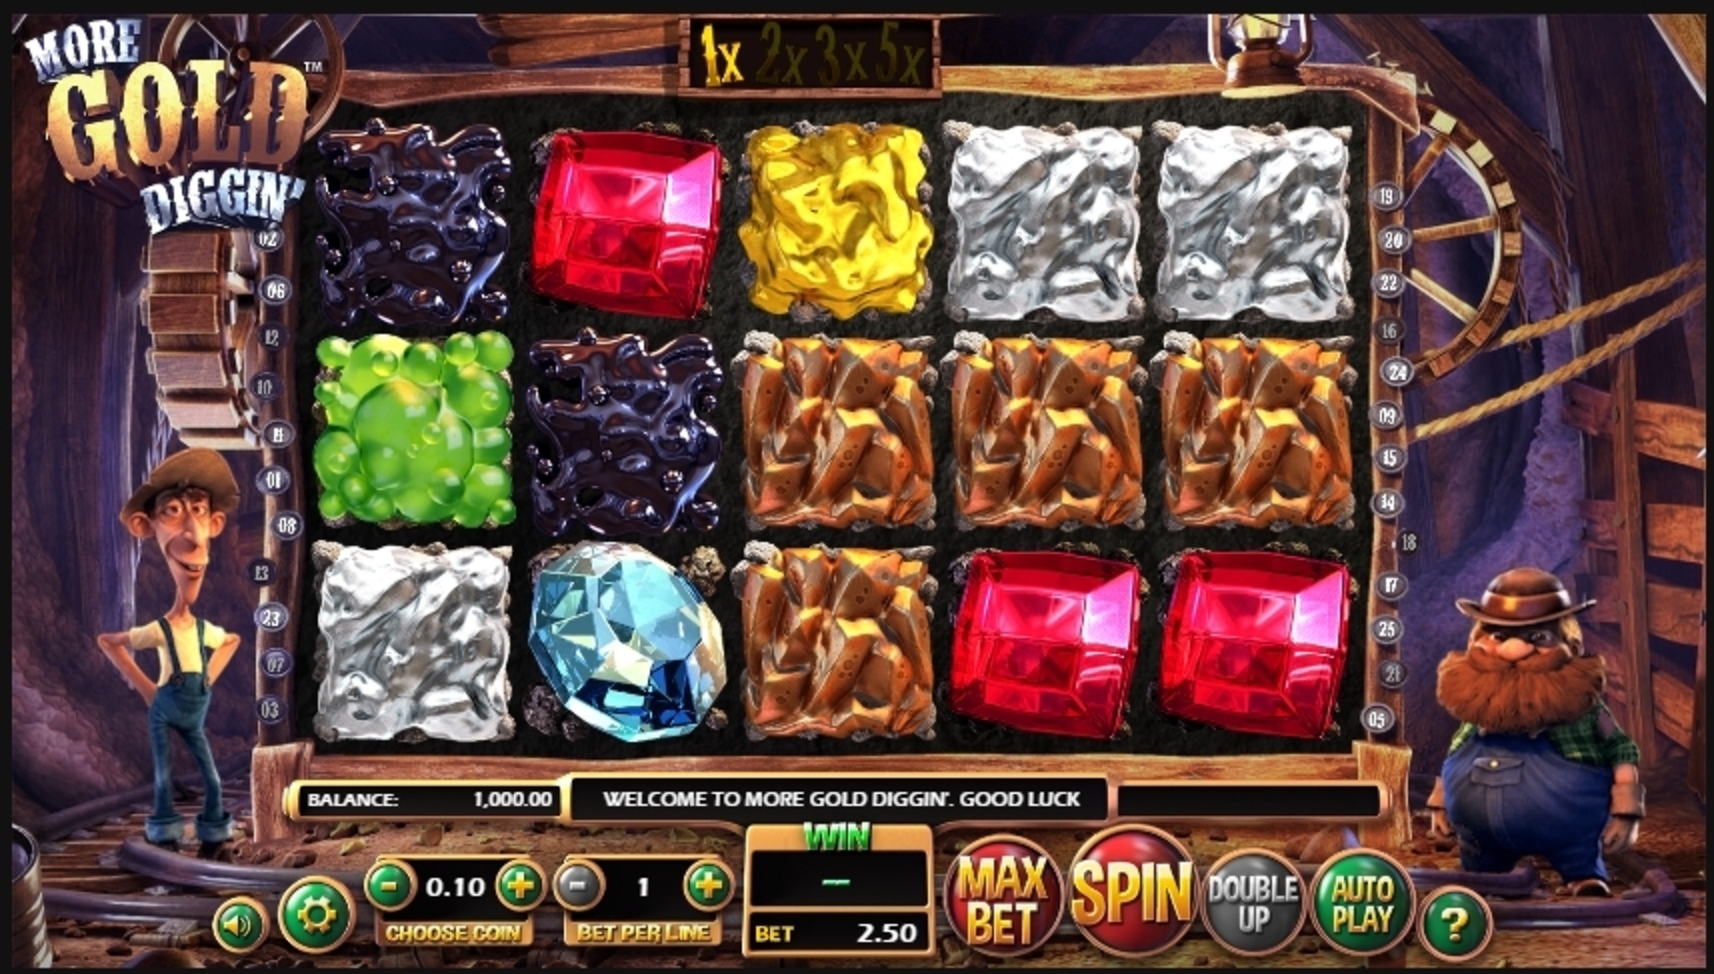 Reels in More Gold Diggin Slot Game by Betsoft